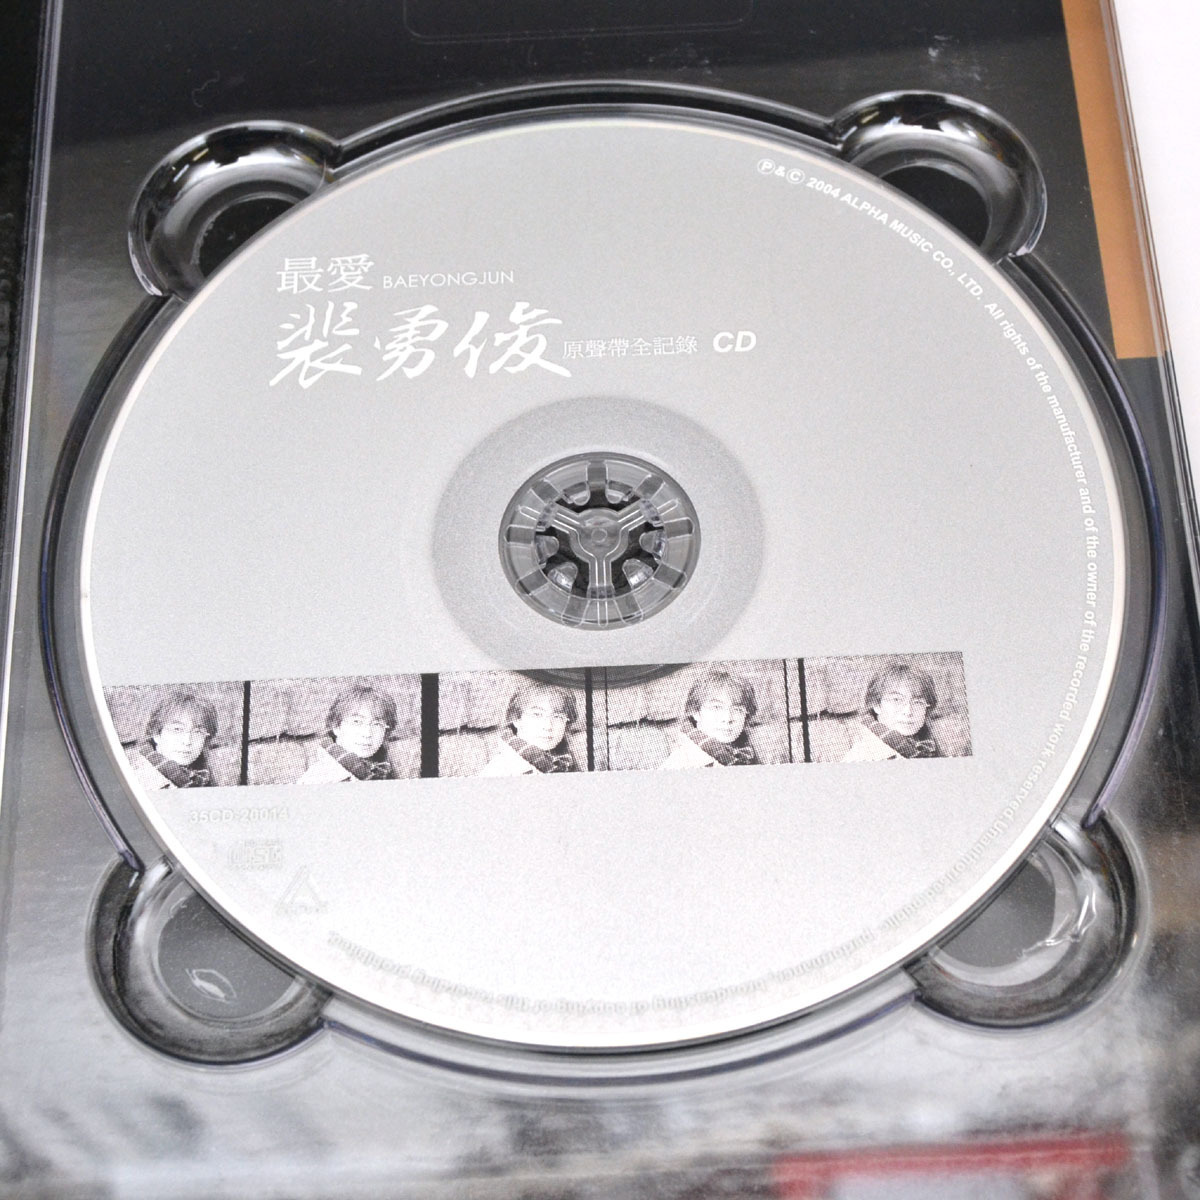 ◆[CD] 最愛 裴勇俊 原聲帯全記録(CD+VCD) 台湾盤 ペ・ヨンジュン出演作サントラ集 [S202239]_画像7